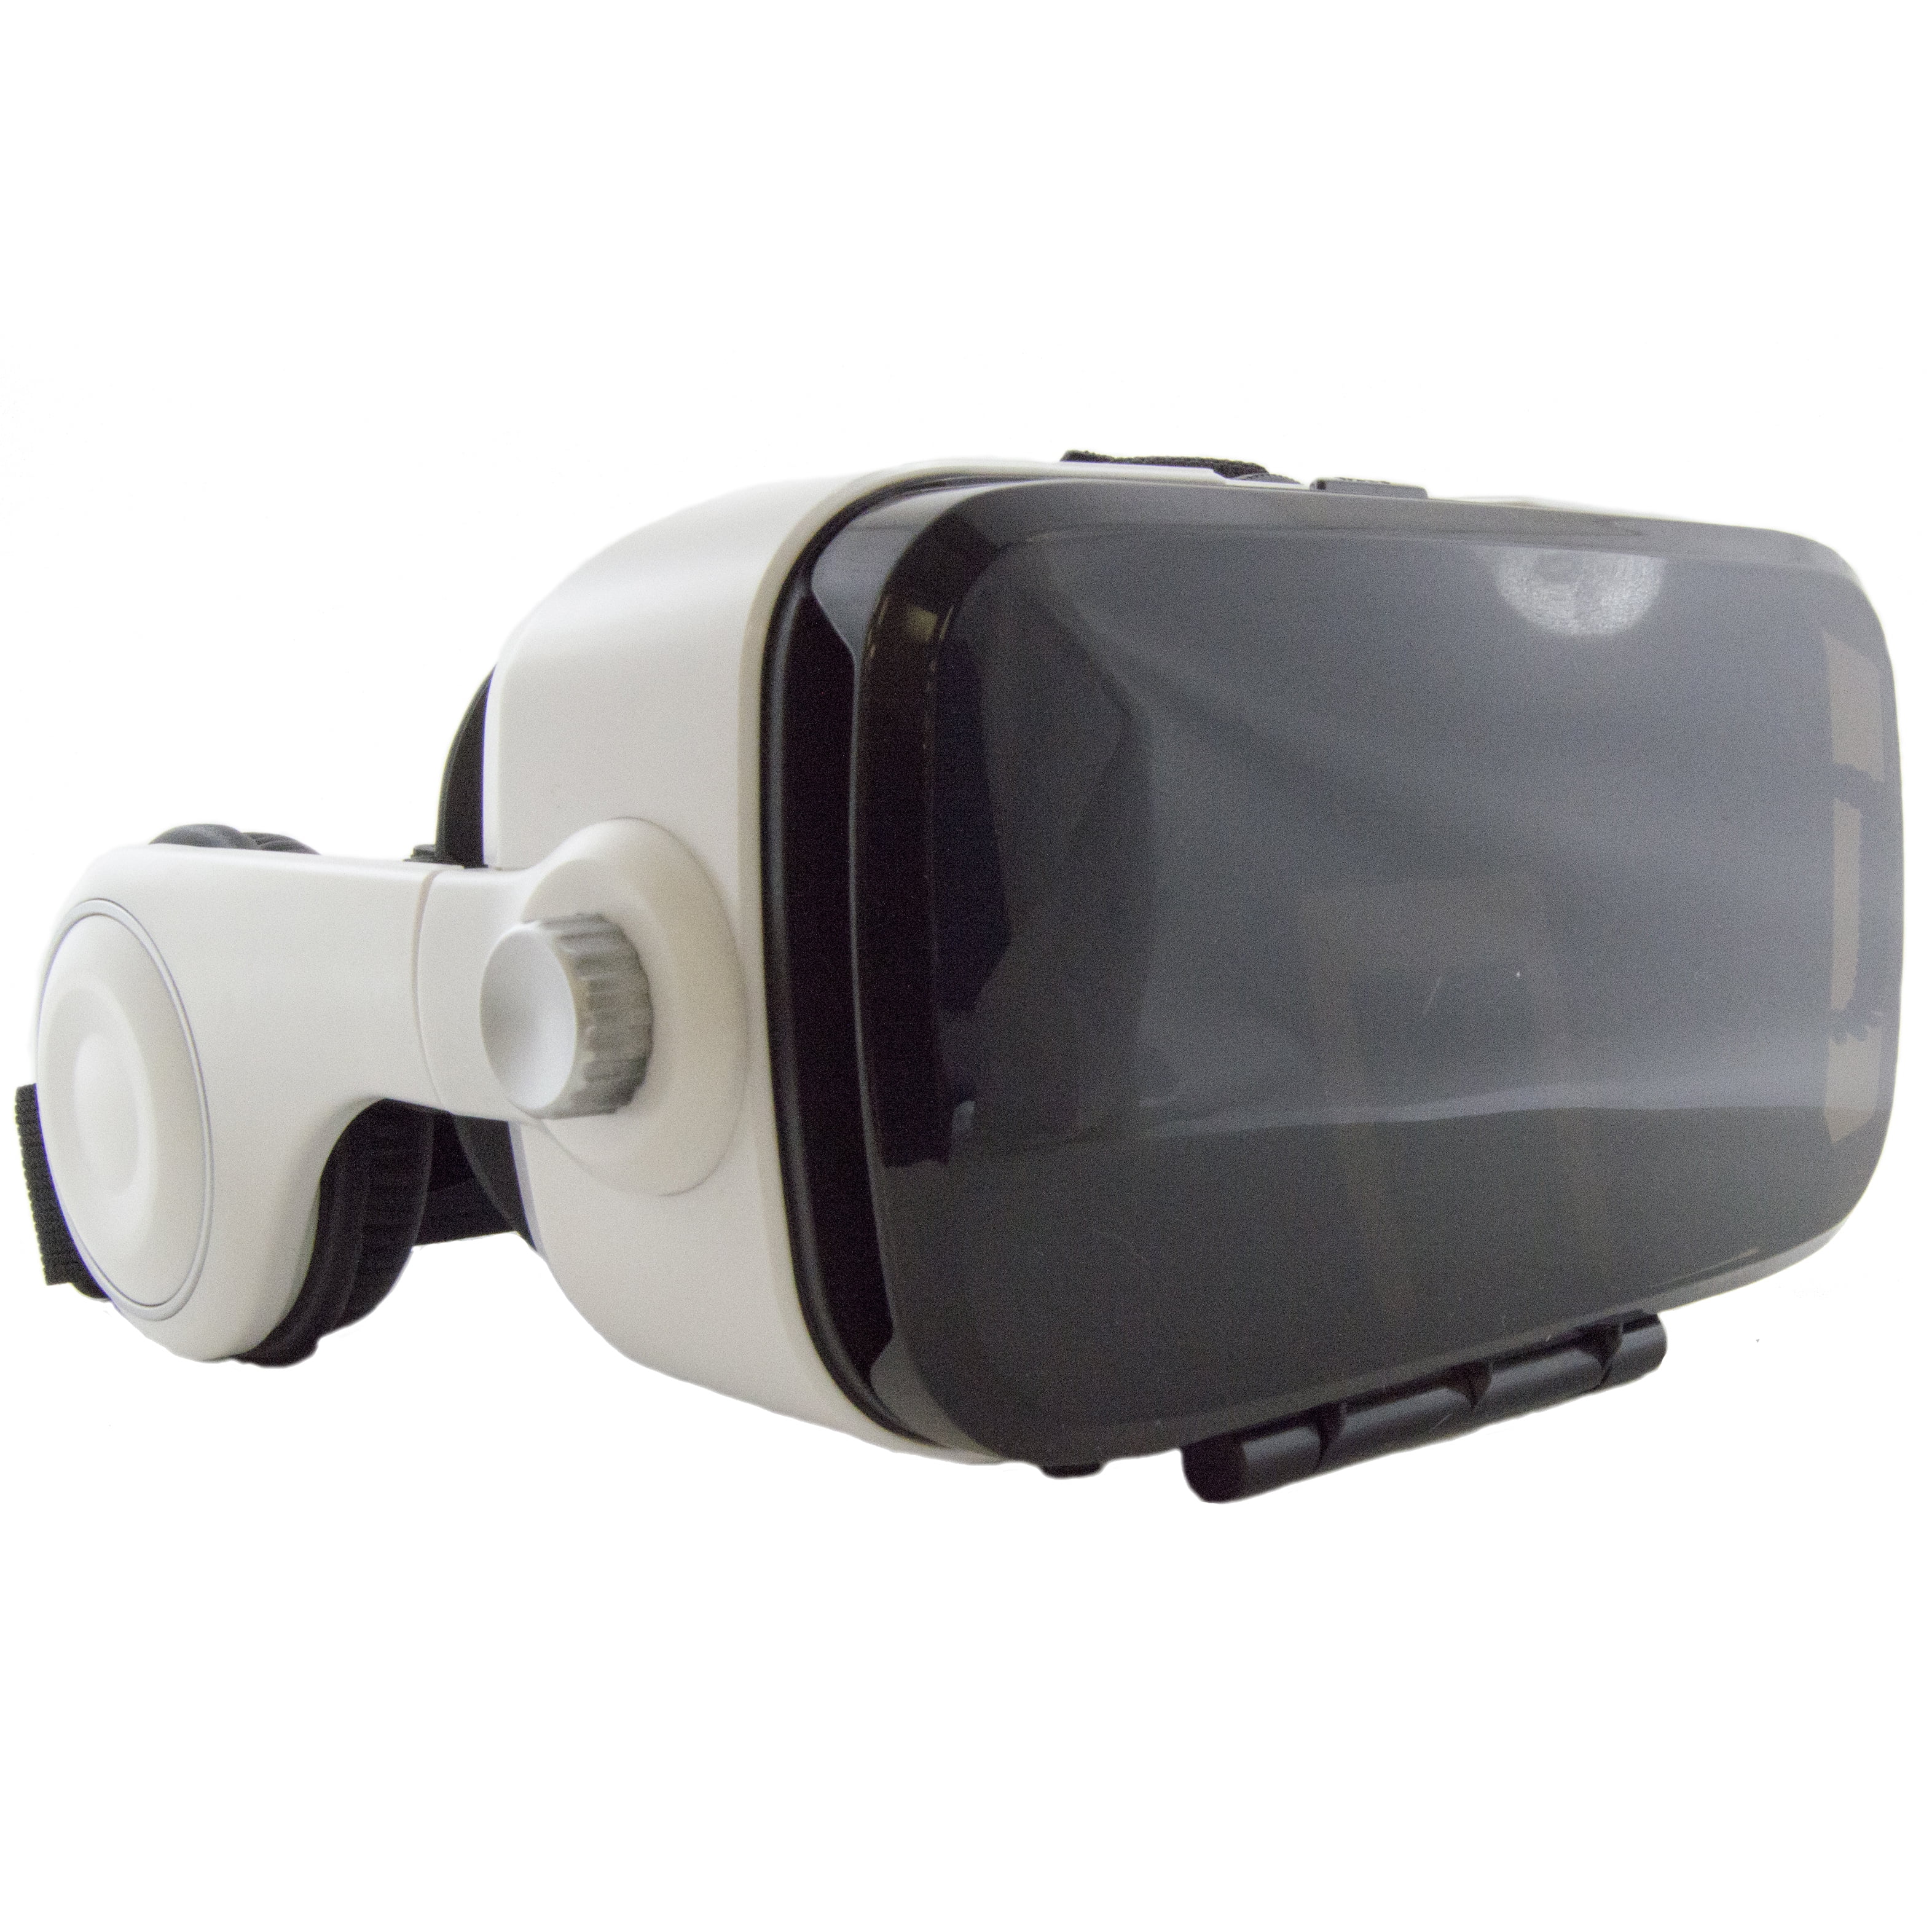 3d Vr Headset With Stereo Headphones For All 4 7 To 6 2